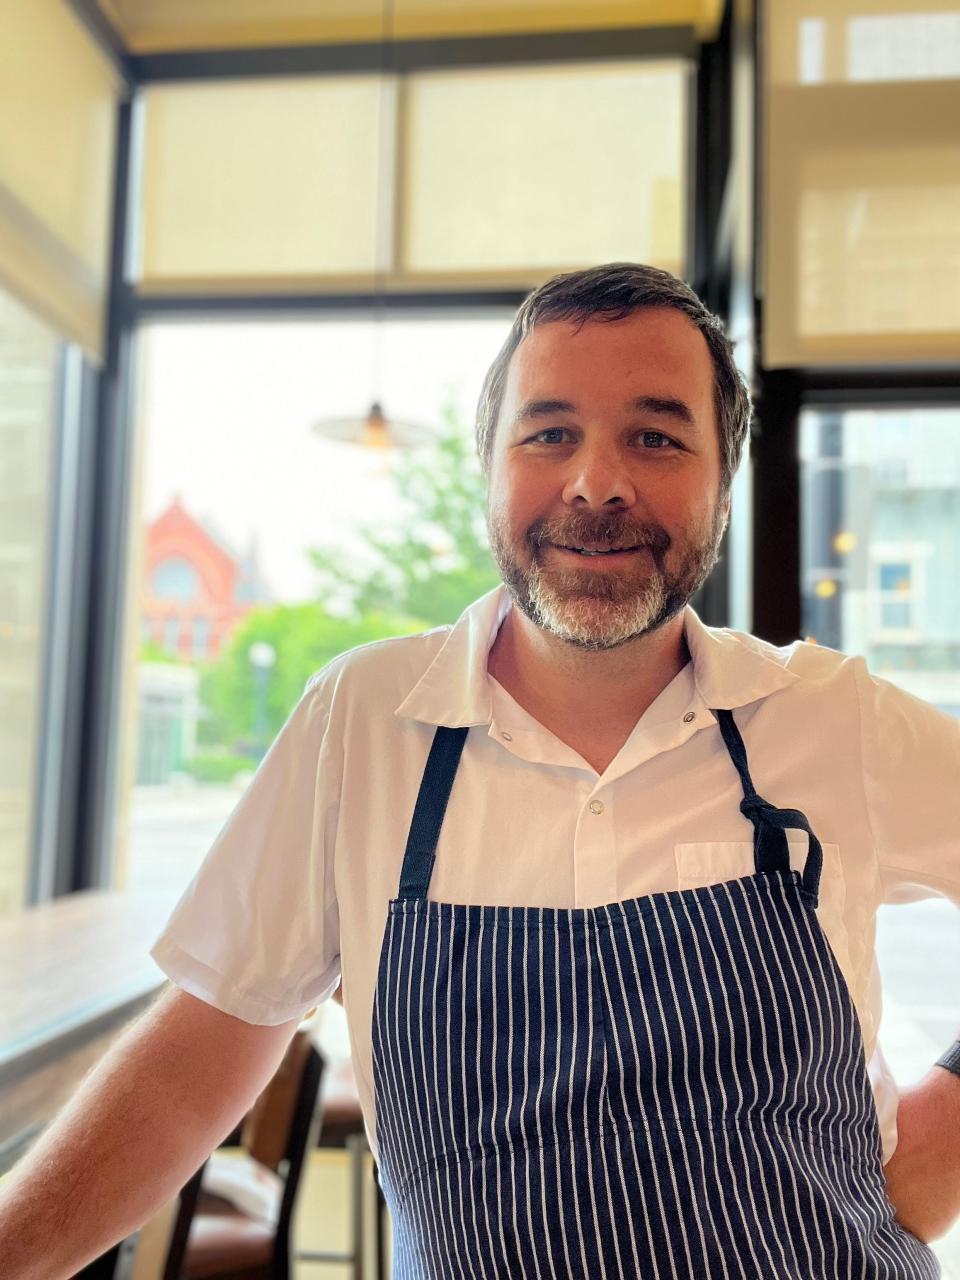 Chef and owner Danny Combs opened Colette, a new French restaurant at 1400 Race Street in Over-the-Rhine.